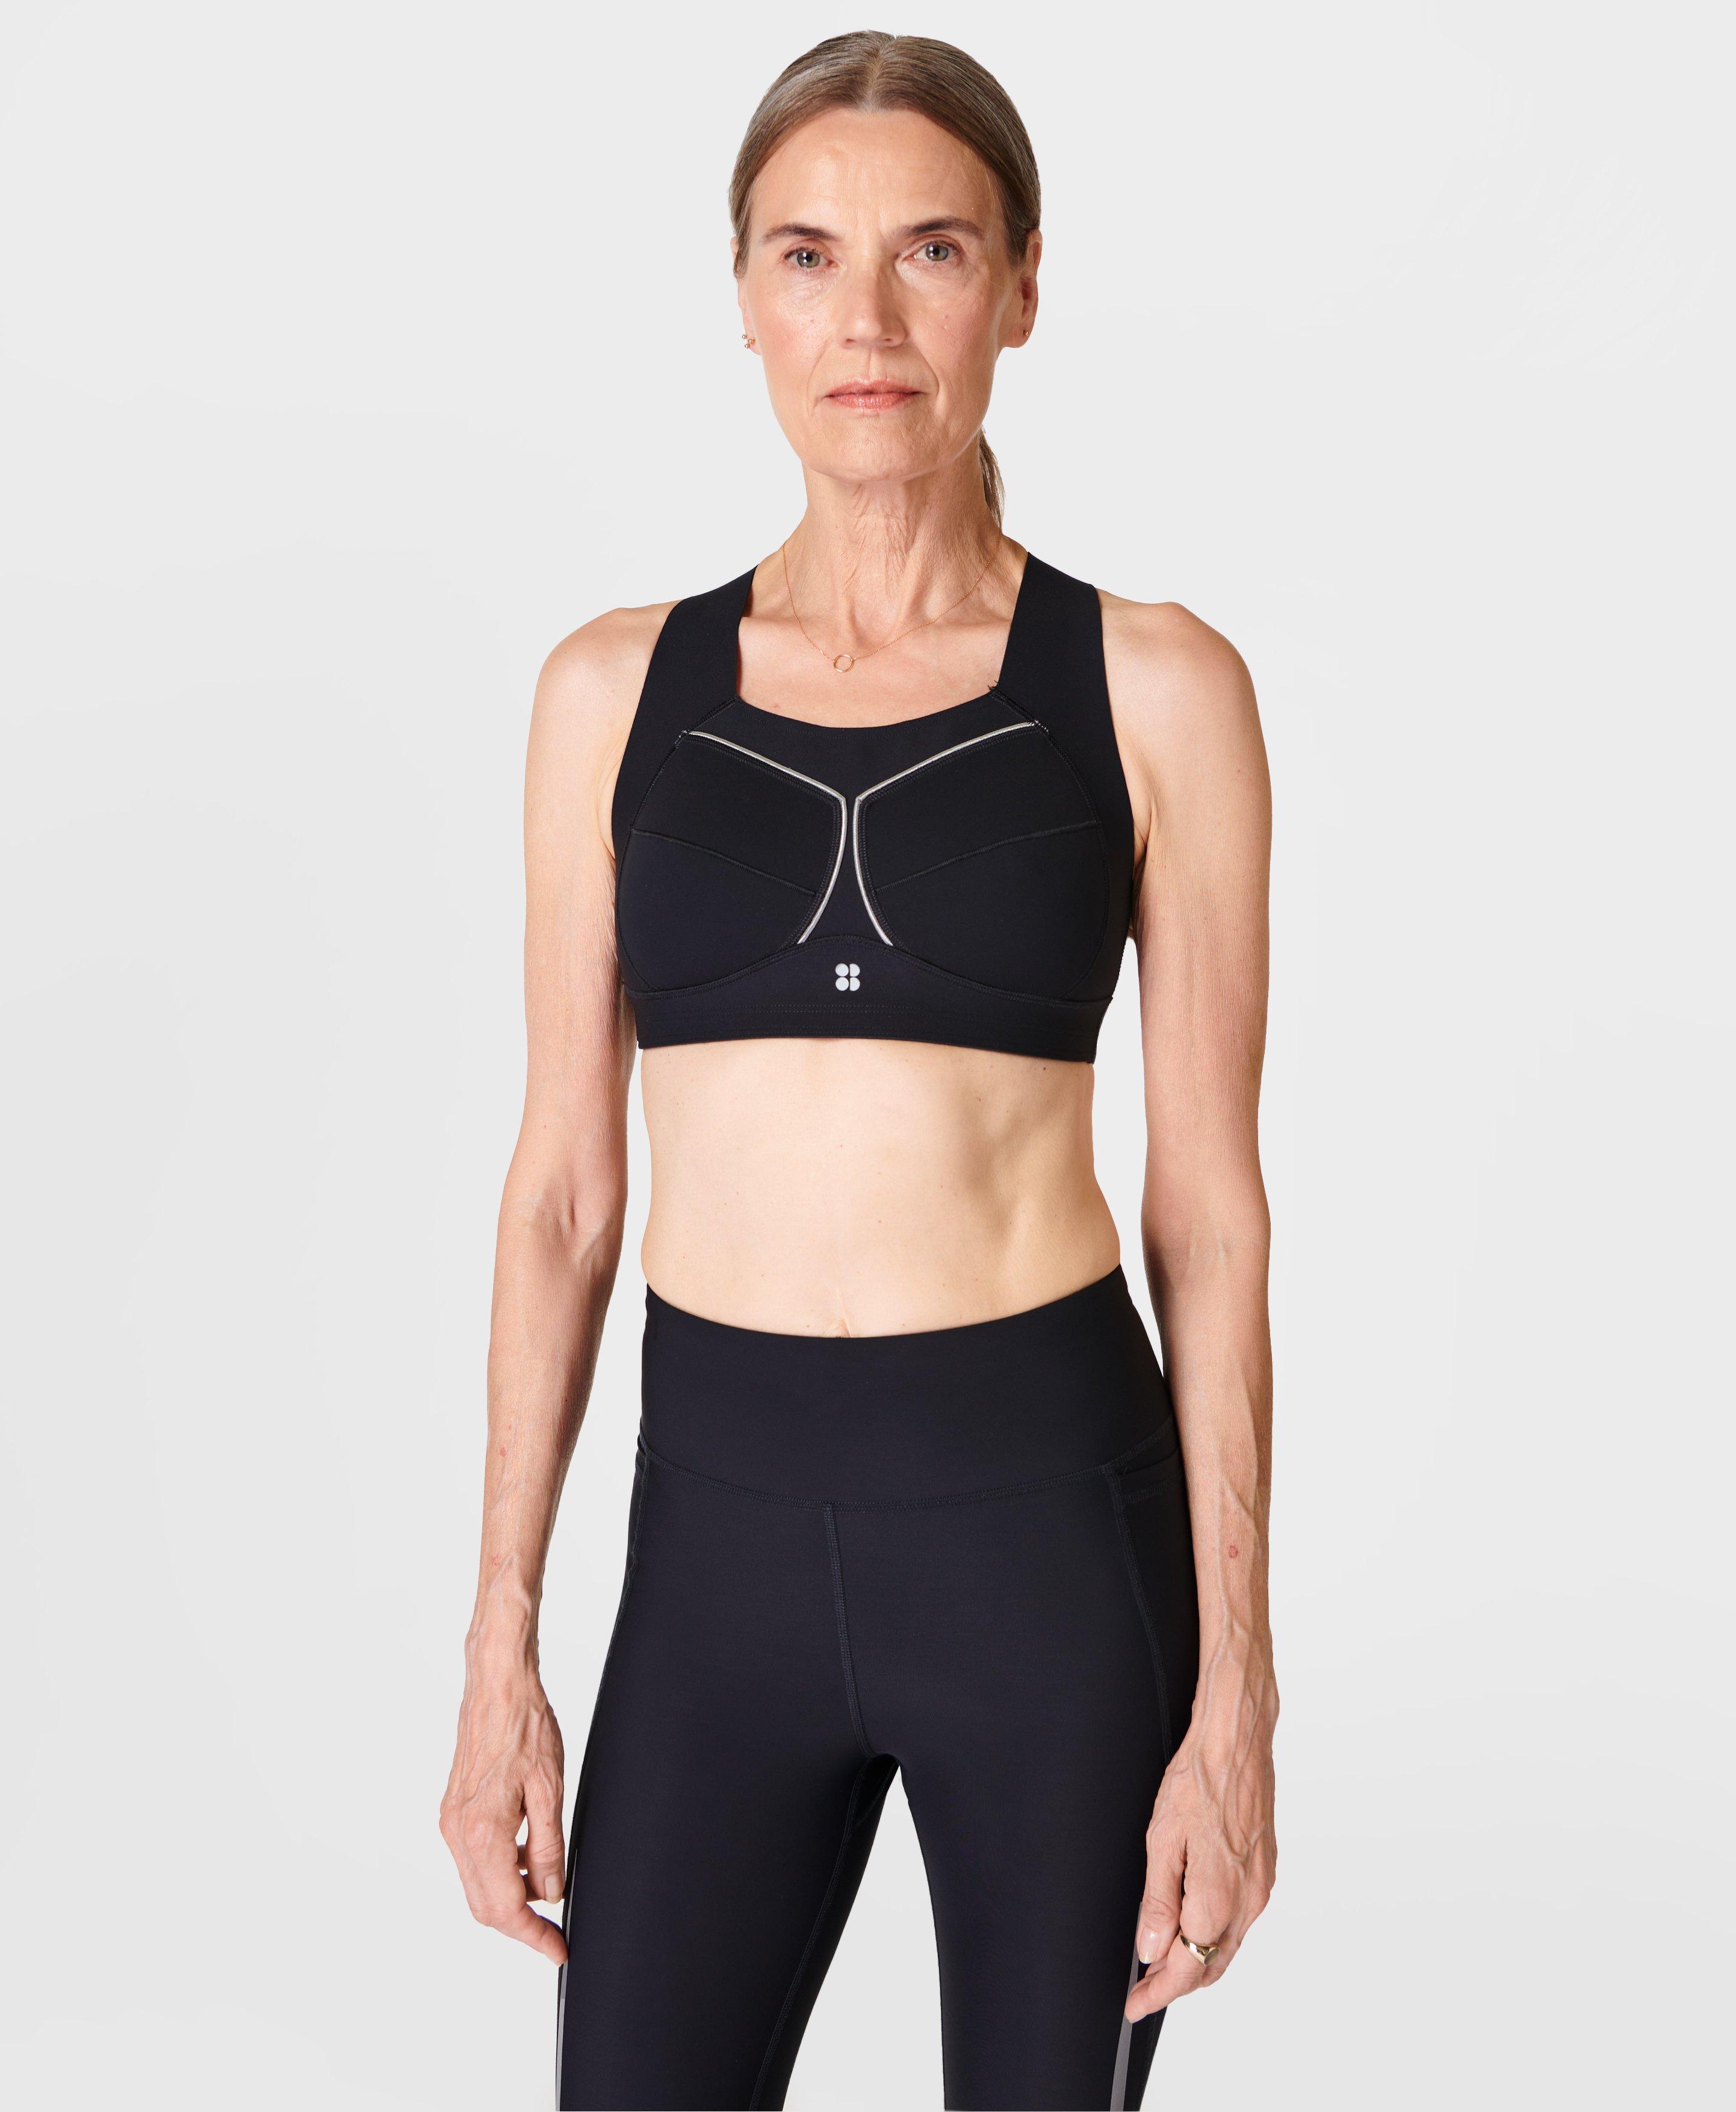 Sweaty Betty Sale - Save Up to 60% Off